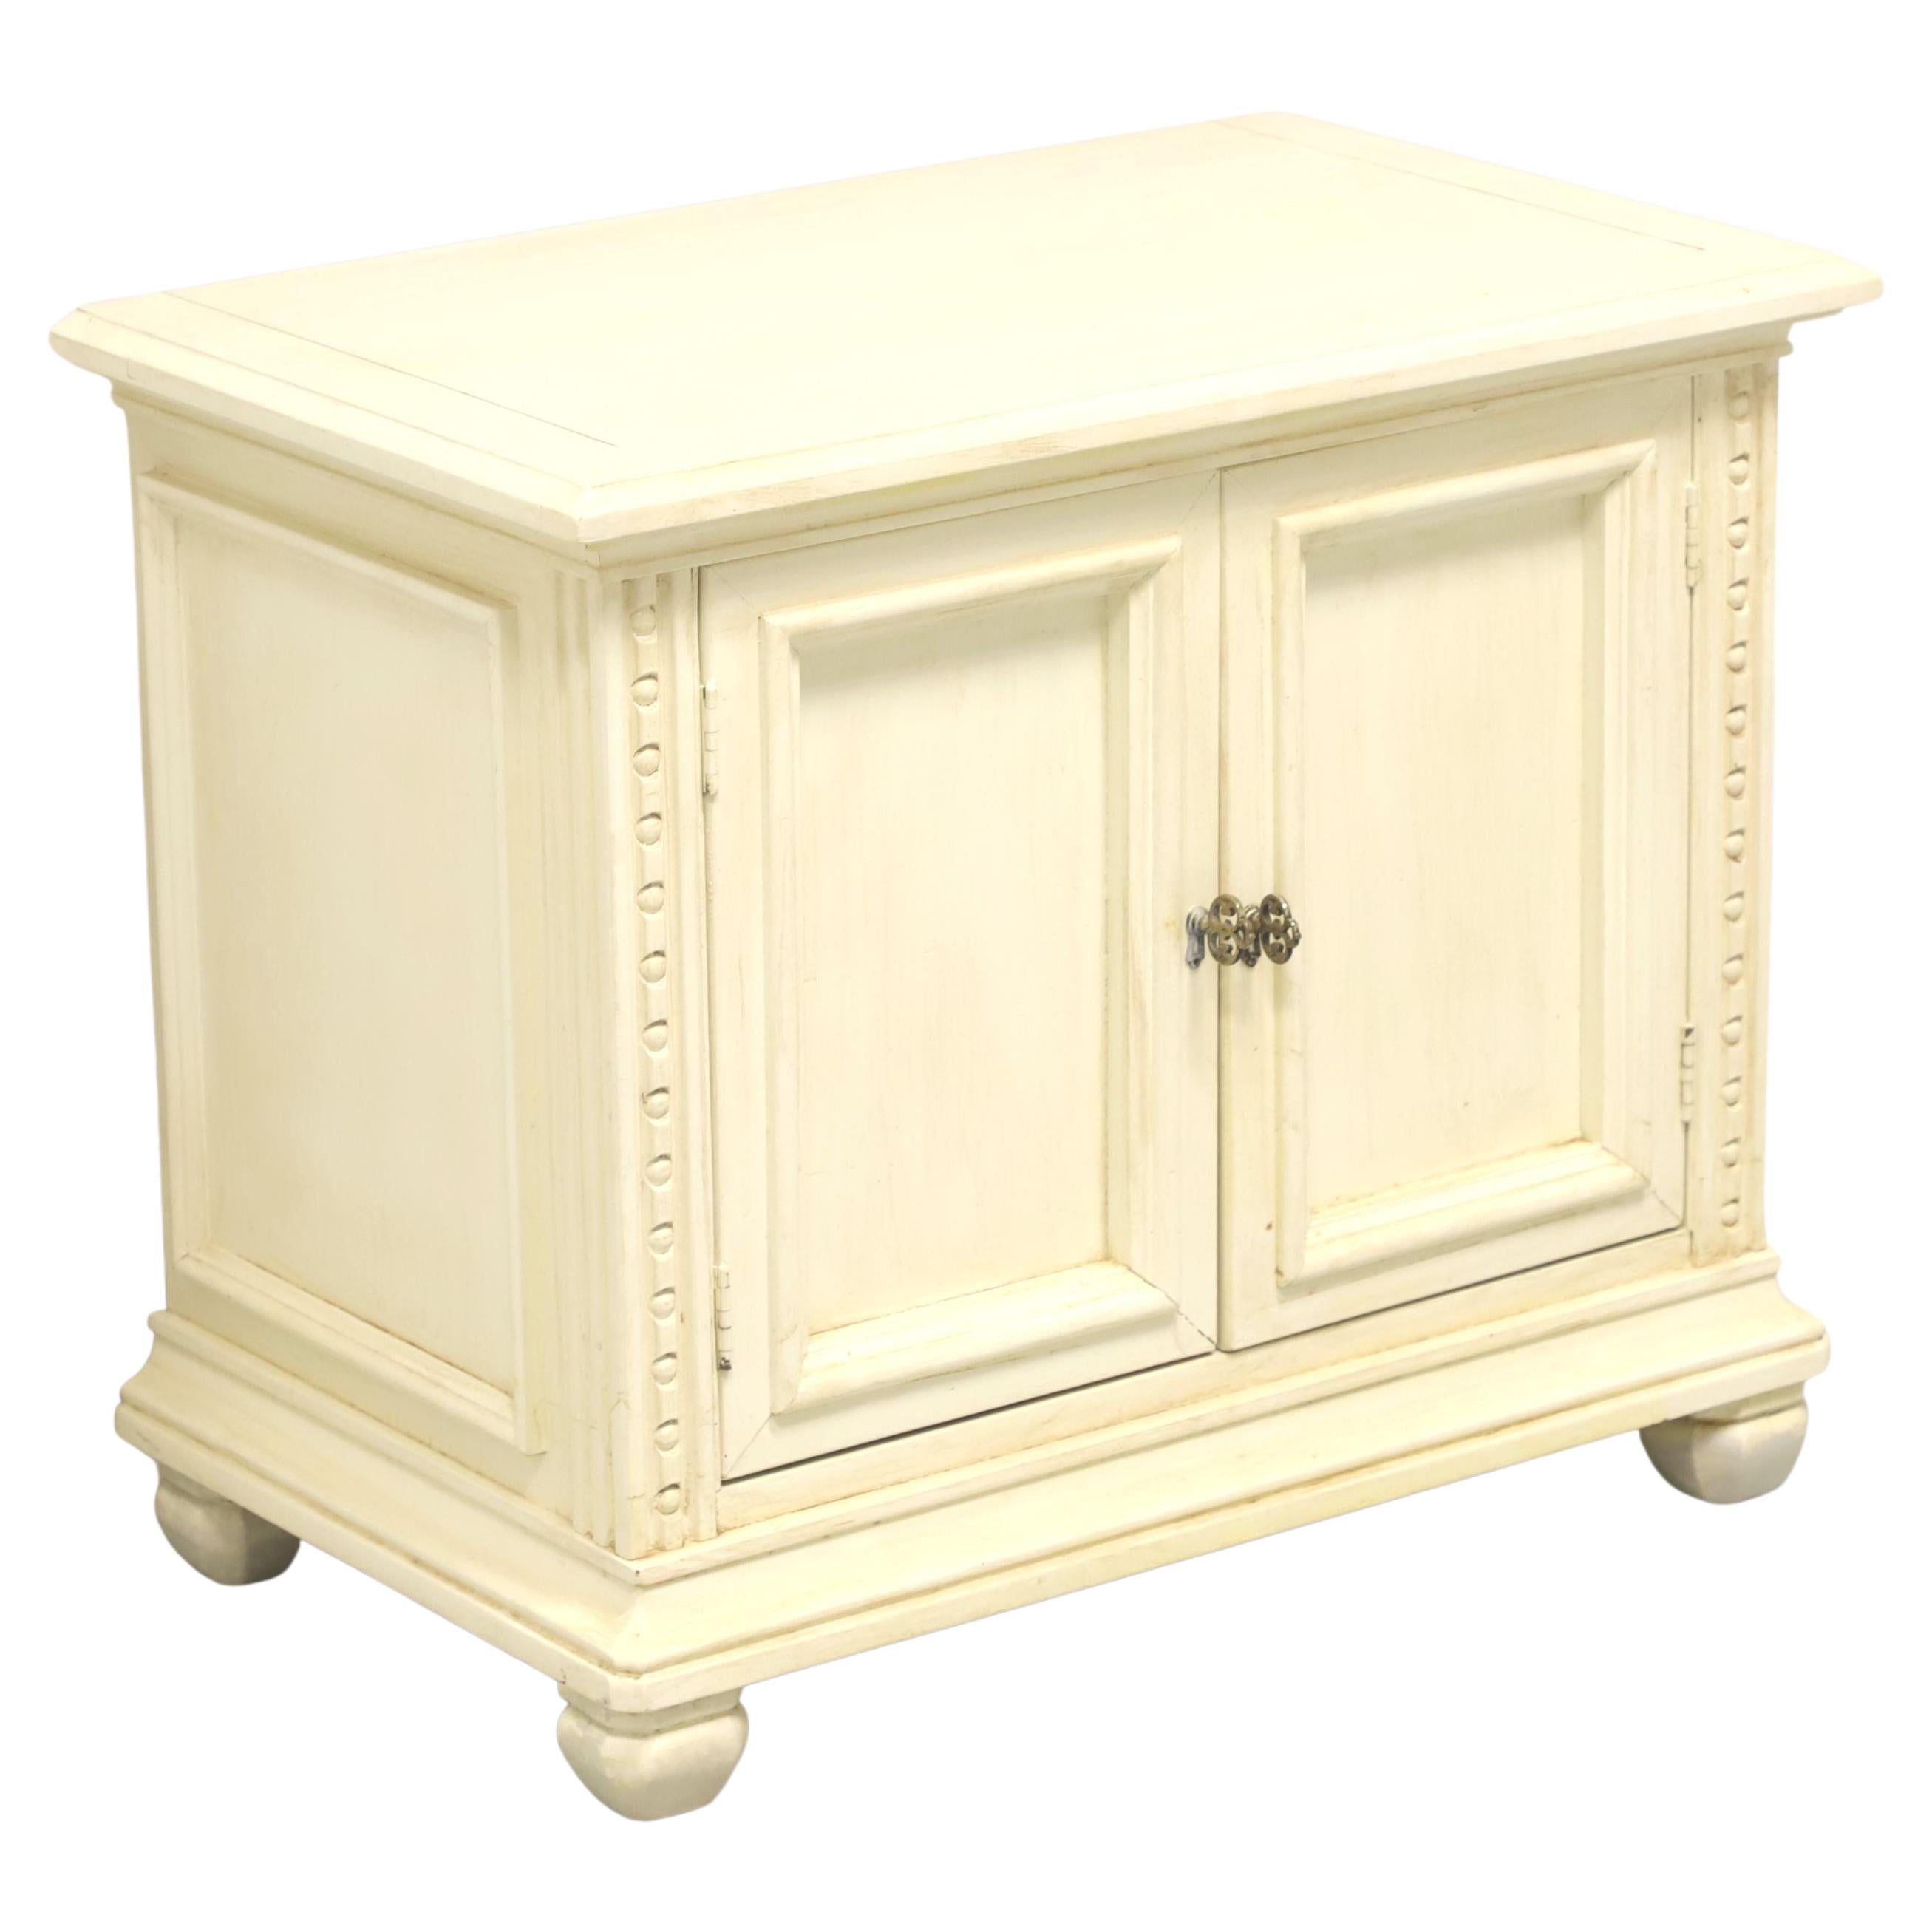 Mid 20th Century Ivory Painted Slightly Distressed Spanish Style Nightstand For Sale